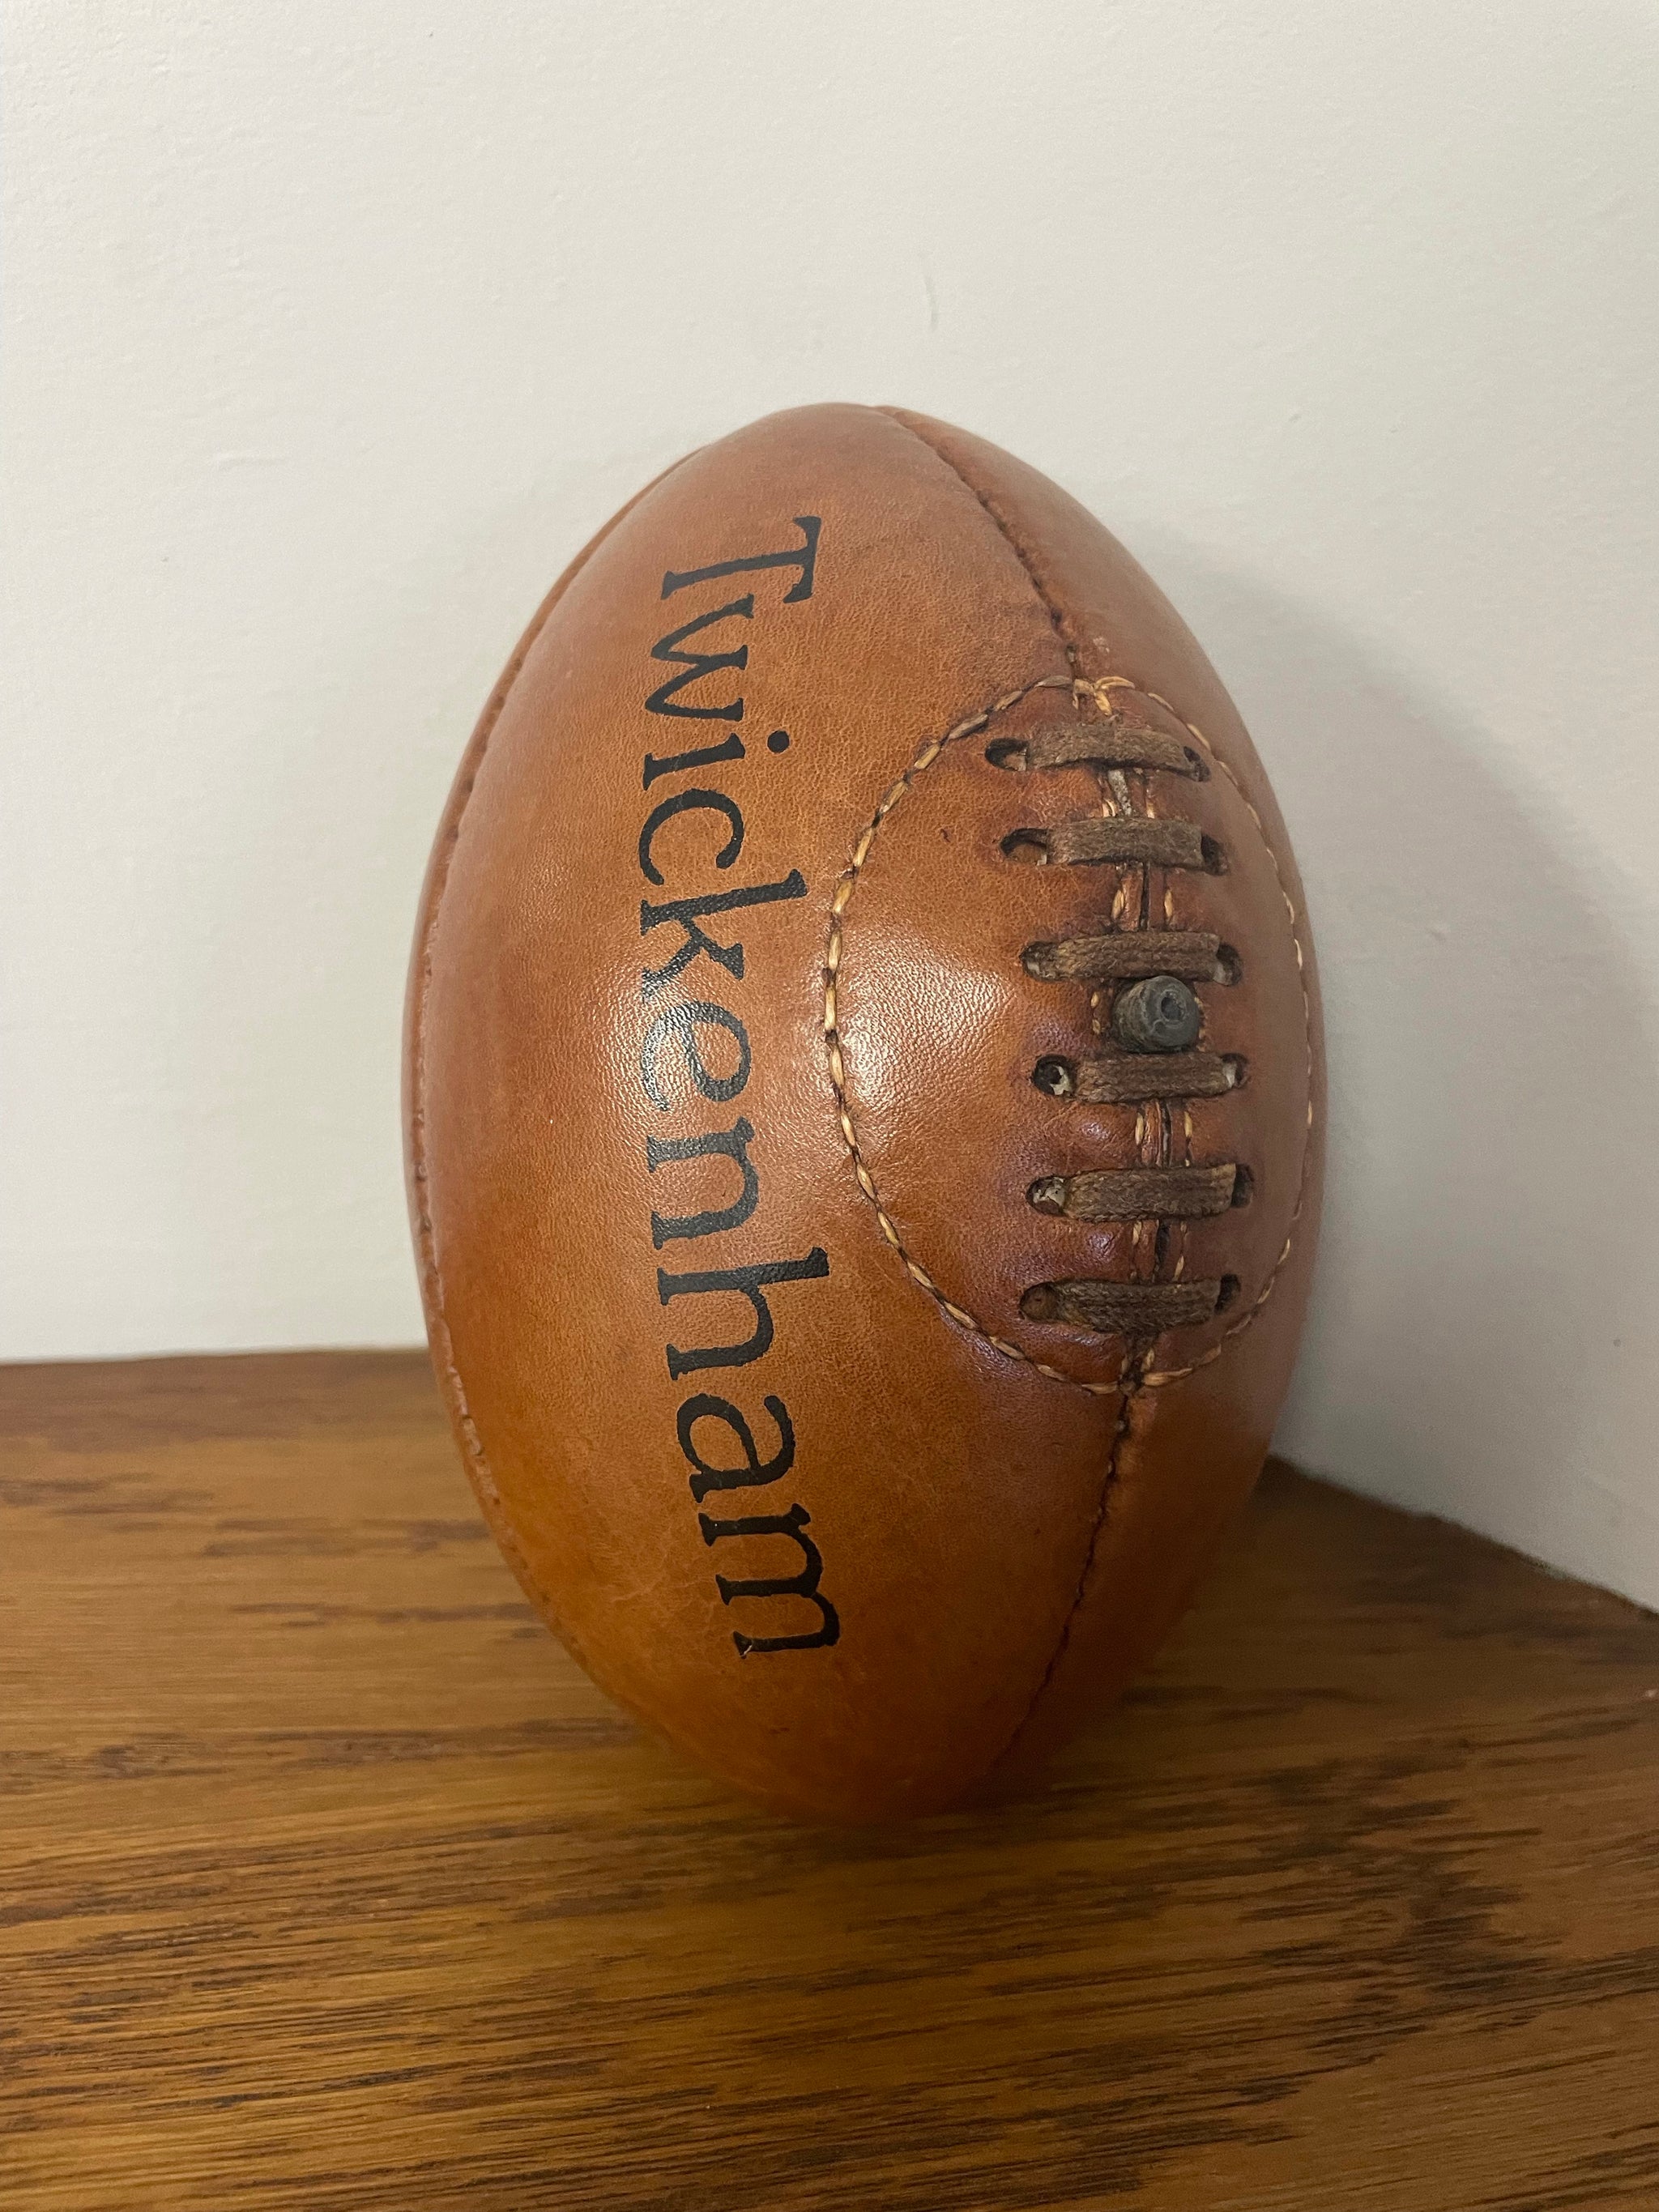 Vintage Style Rugby Ball - 2 sizes